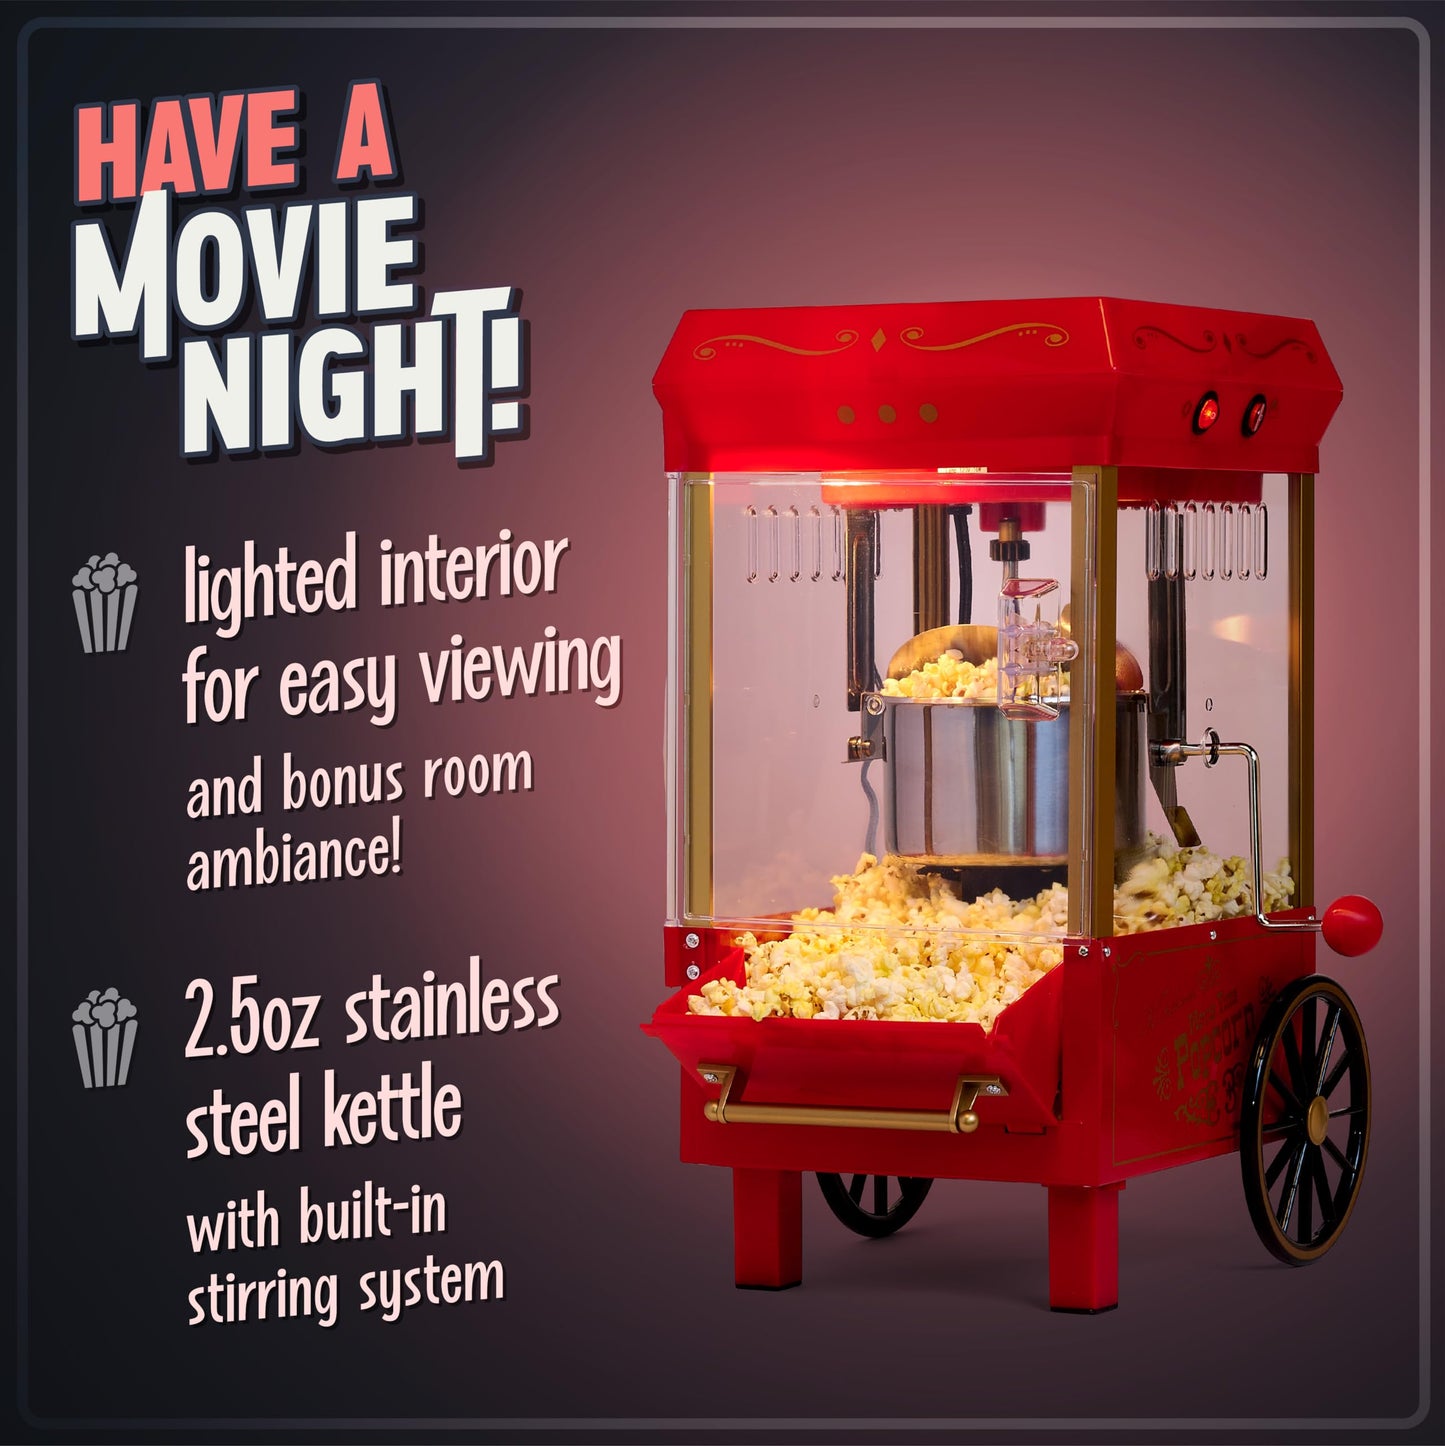 Nostalgia Popcorn Maker Machine - Professional Tabletop With 2.5 Oz Kettle Makes Up to 10 Cups - Vintage Popcorn Machine Movie Theater Style - Red